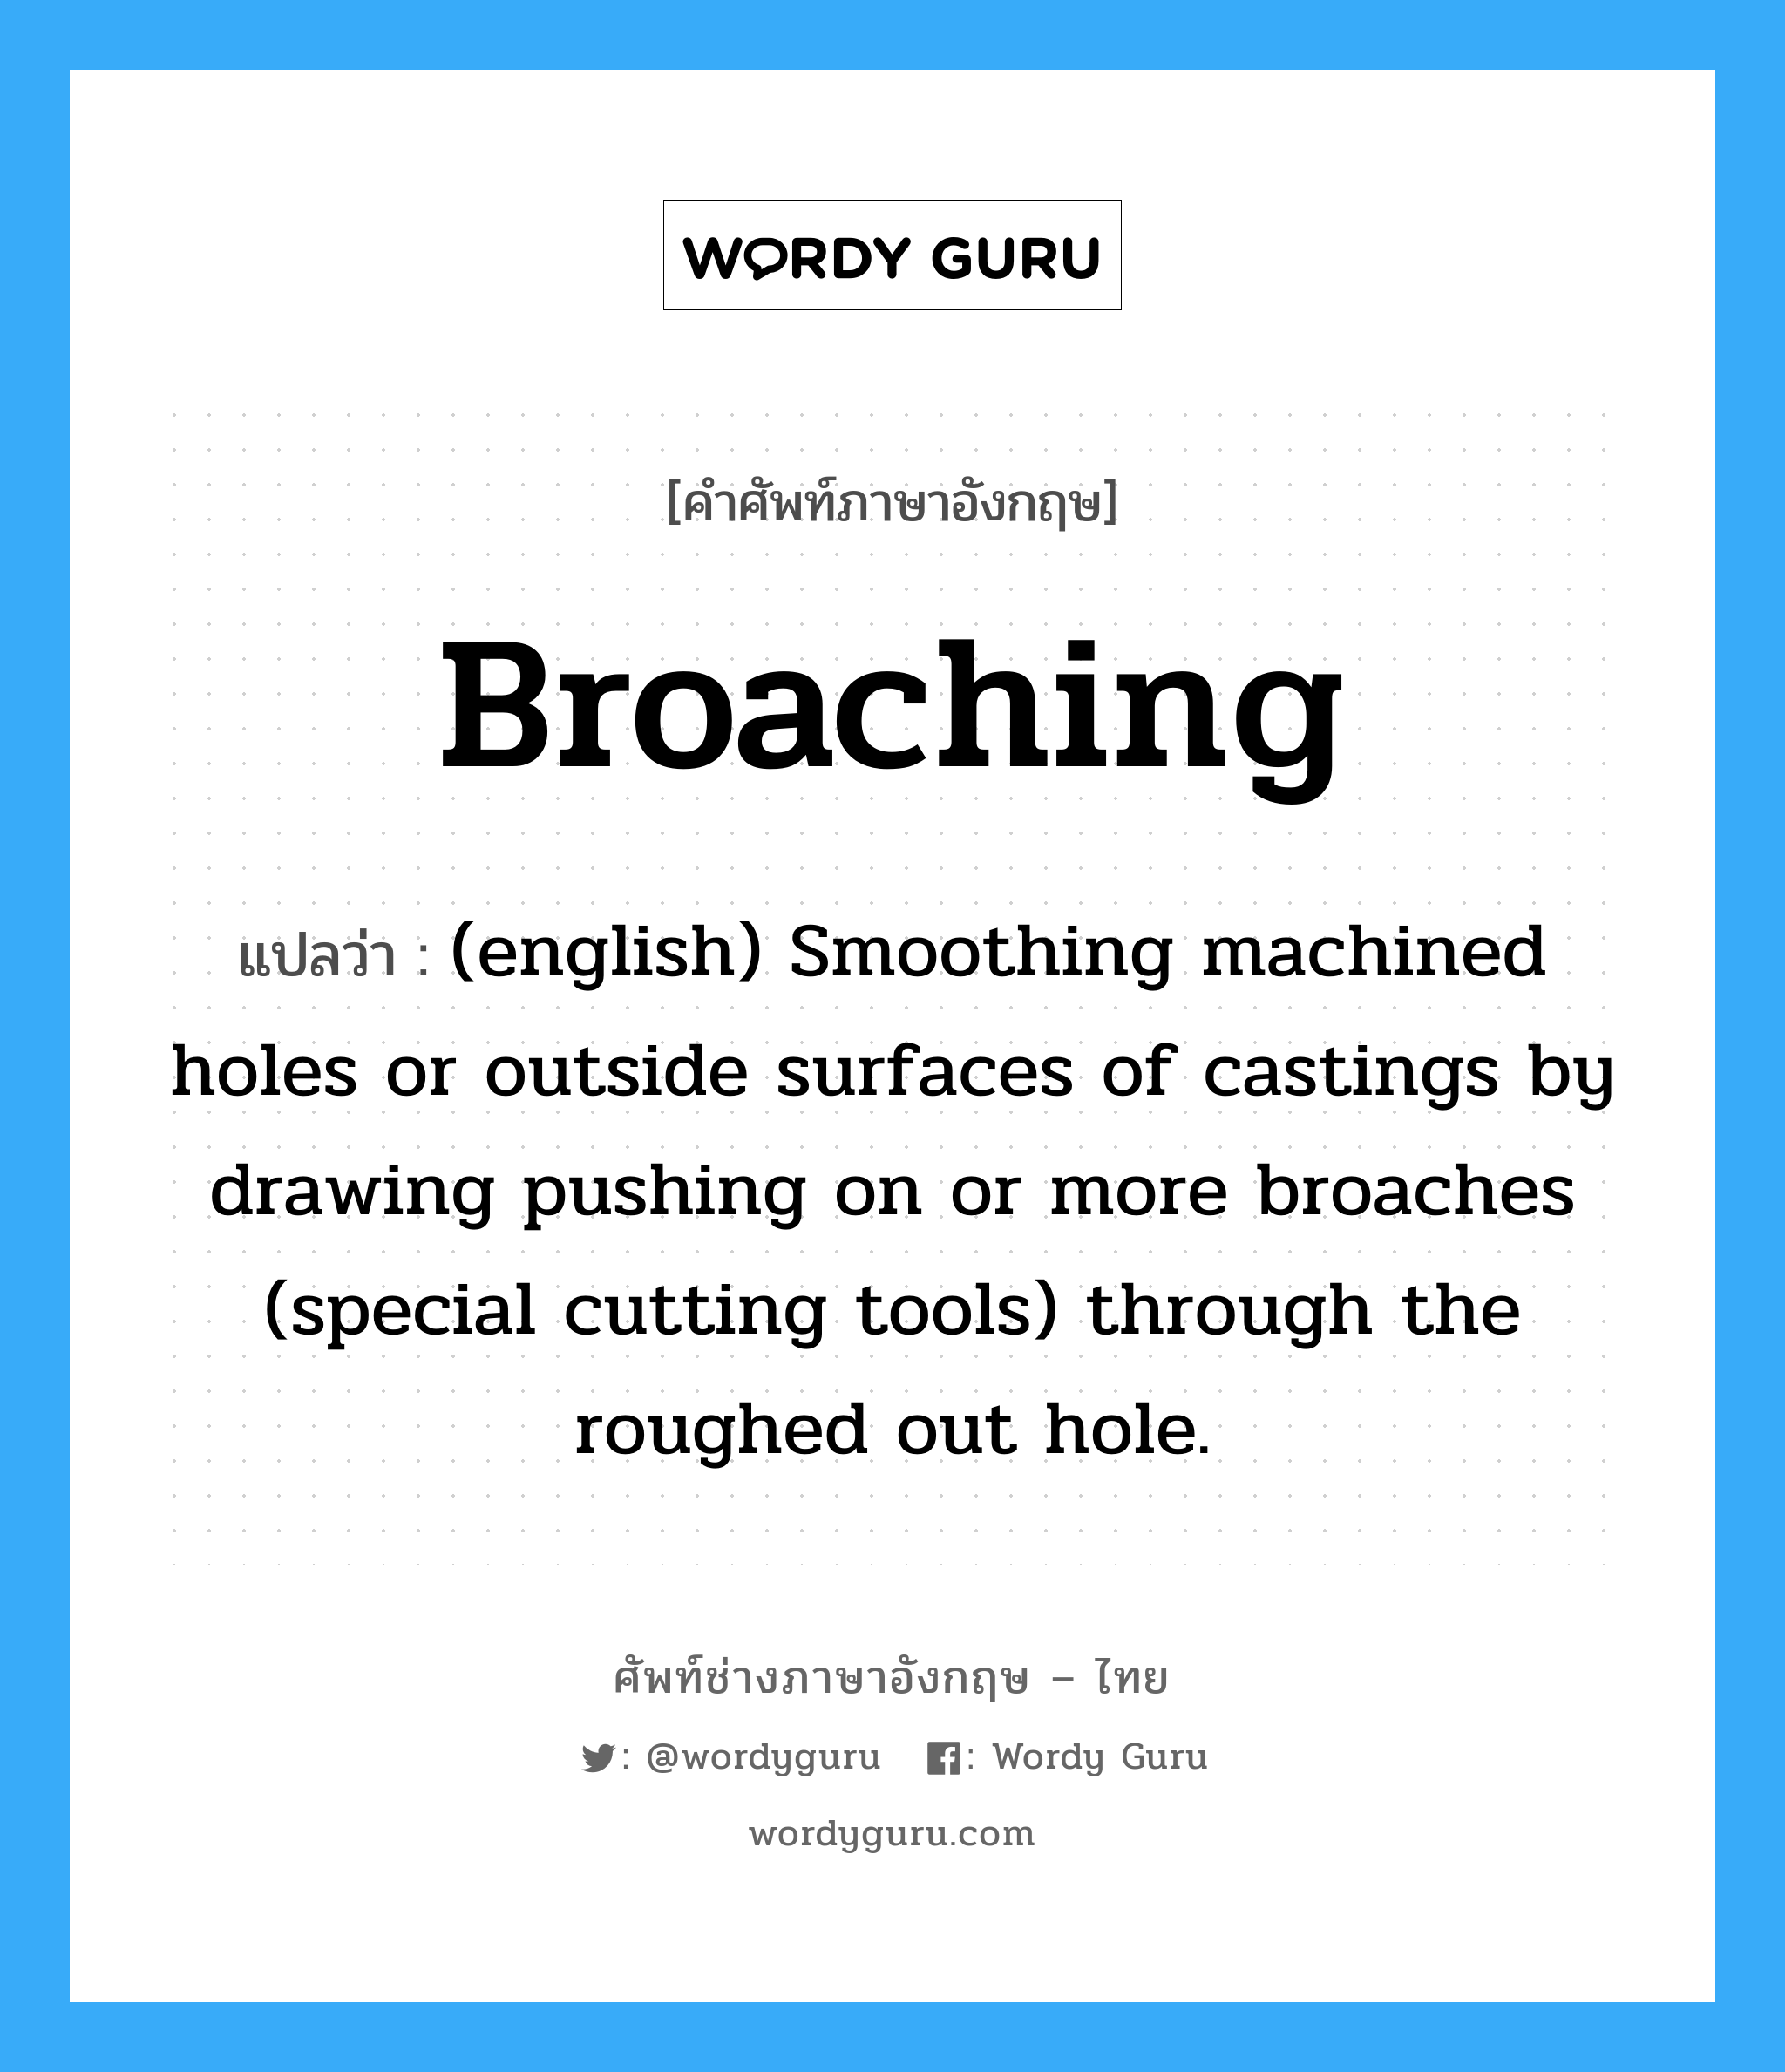 (english) Smoothing machined holes or outside surfaces of castings by drawing pushing on or more broaches (special cutting tools) through the roughed out hole. ภาษาอังกฤษ?, คำศัพท์ช่างภาษาอังกฤษ - ไทย (english) Smoothing machined holes or outside surfaces of castings by drawing pushing on or more broaches (special cutting tools) through the roughed out hole. คำศัพท์ภาษาอังกฤษ (english) Smoothing machined holes or outside surfaces of castings by drawing pushing on or more broaches (special cutting tools) through the roughed out hole. แปลว่า Broaching